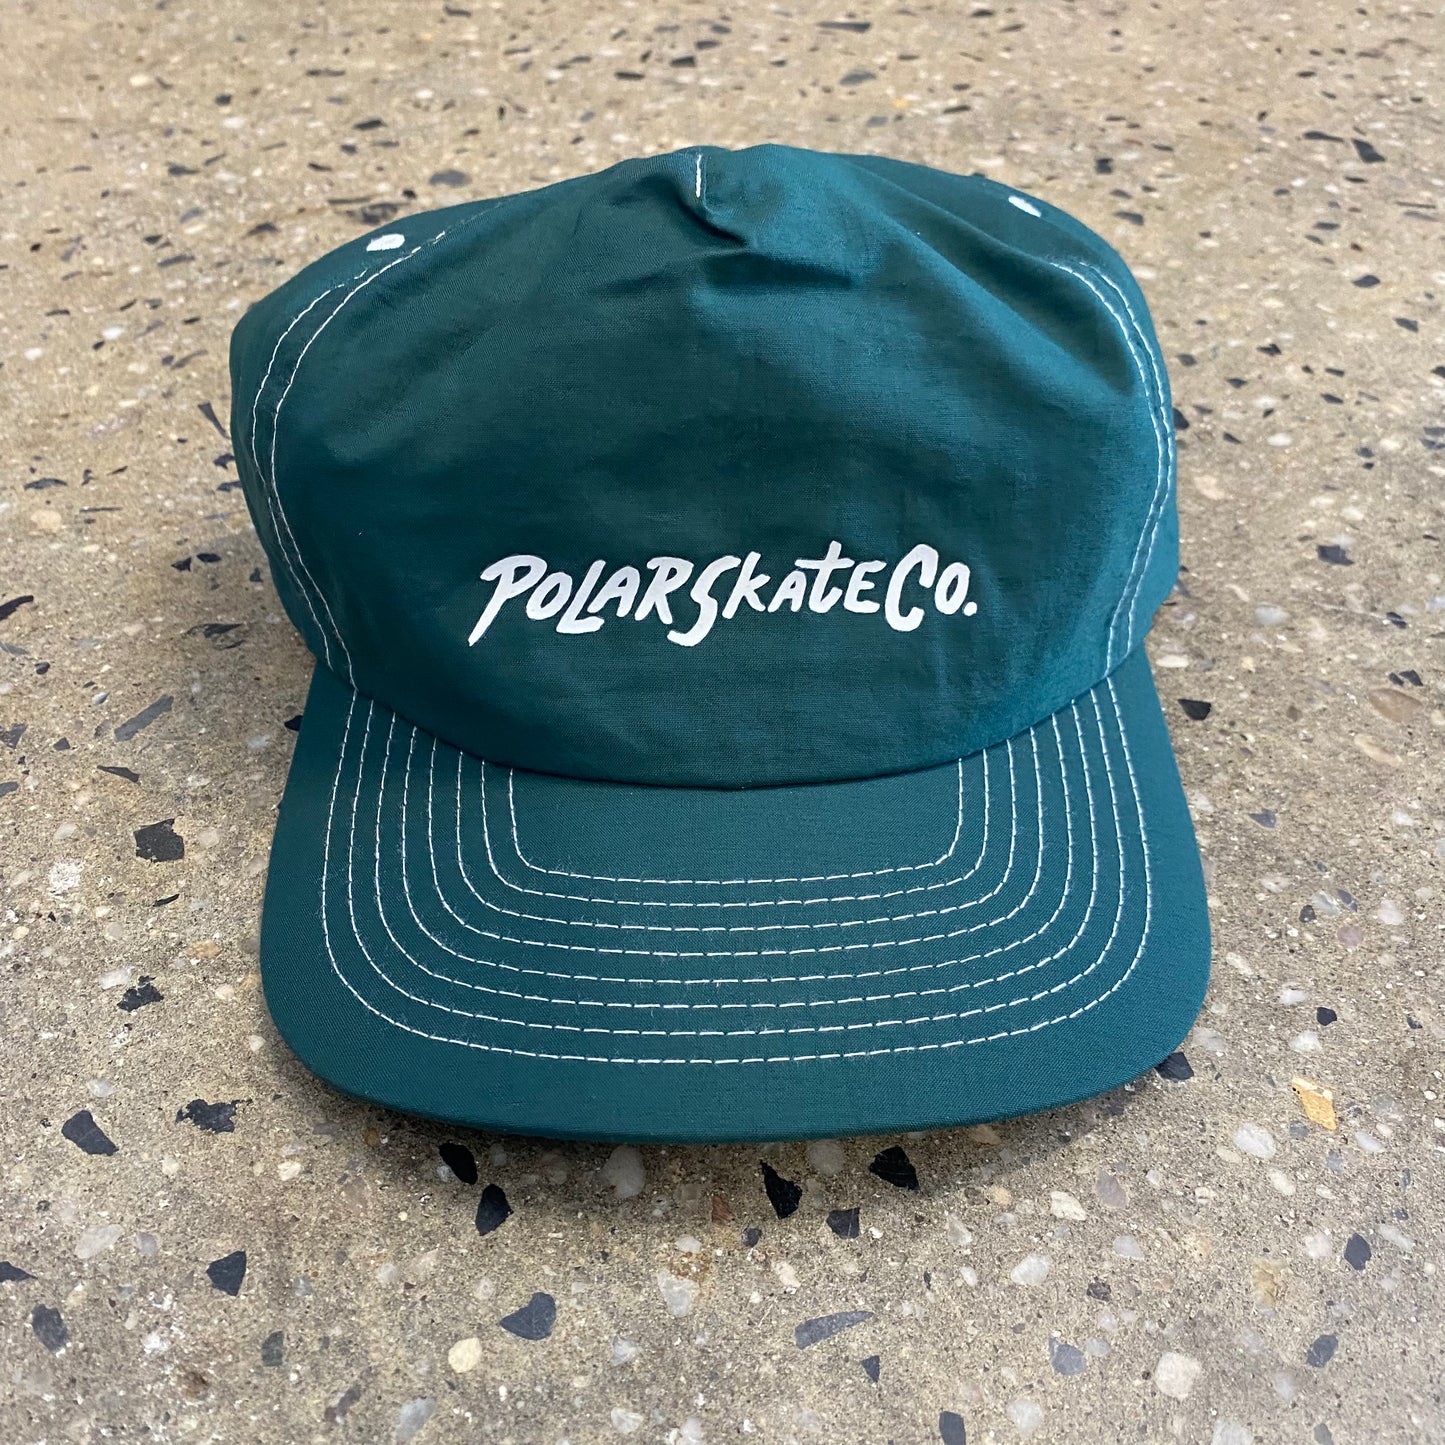 green hat with white stitching and white text in the middle